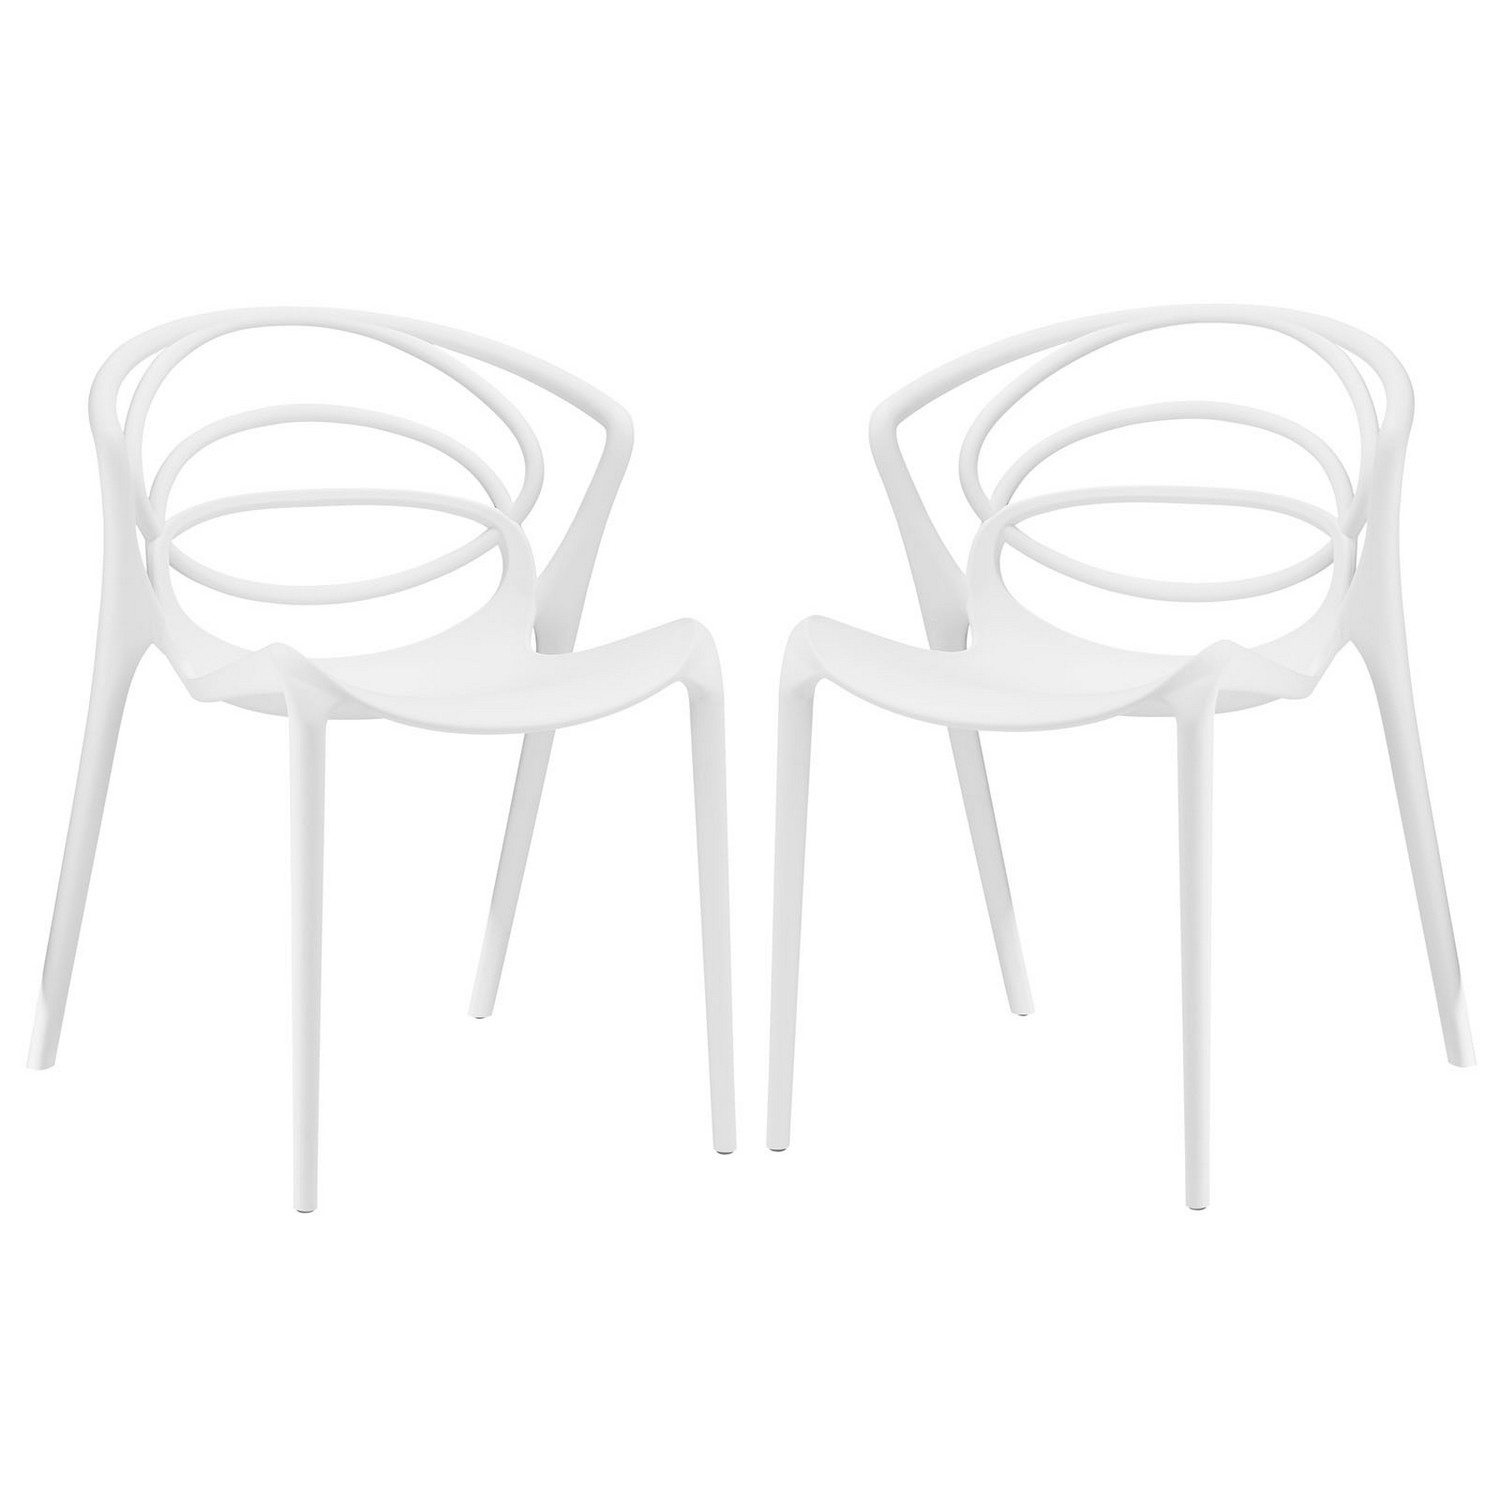 Modway Locus Dining Chair - Set of 2 - White